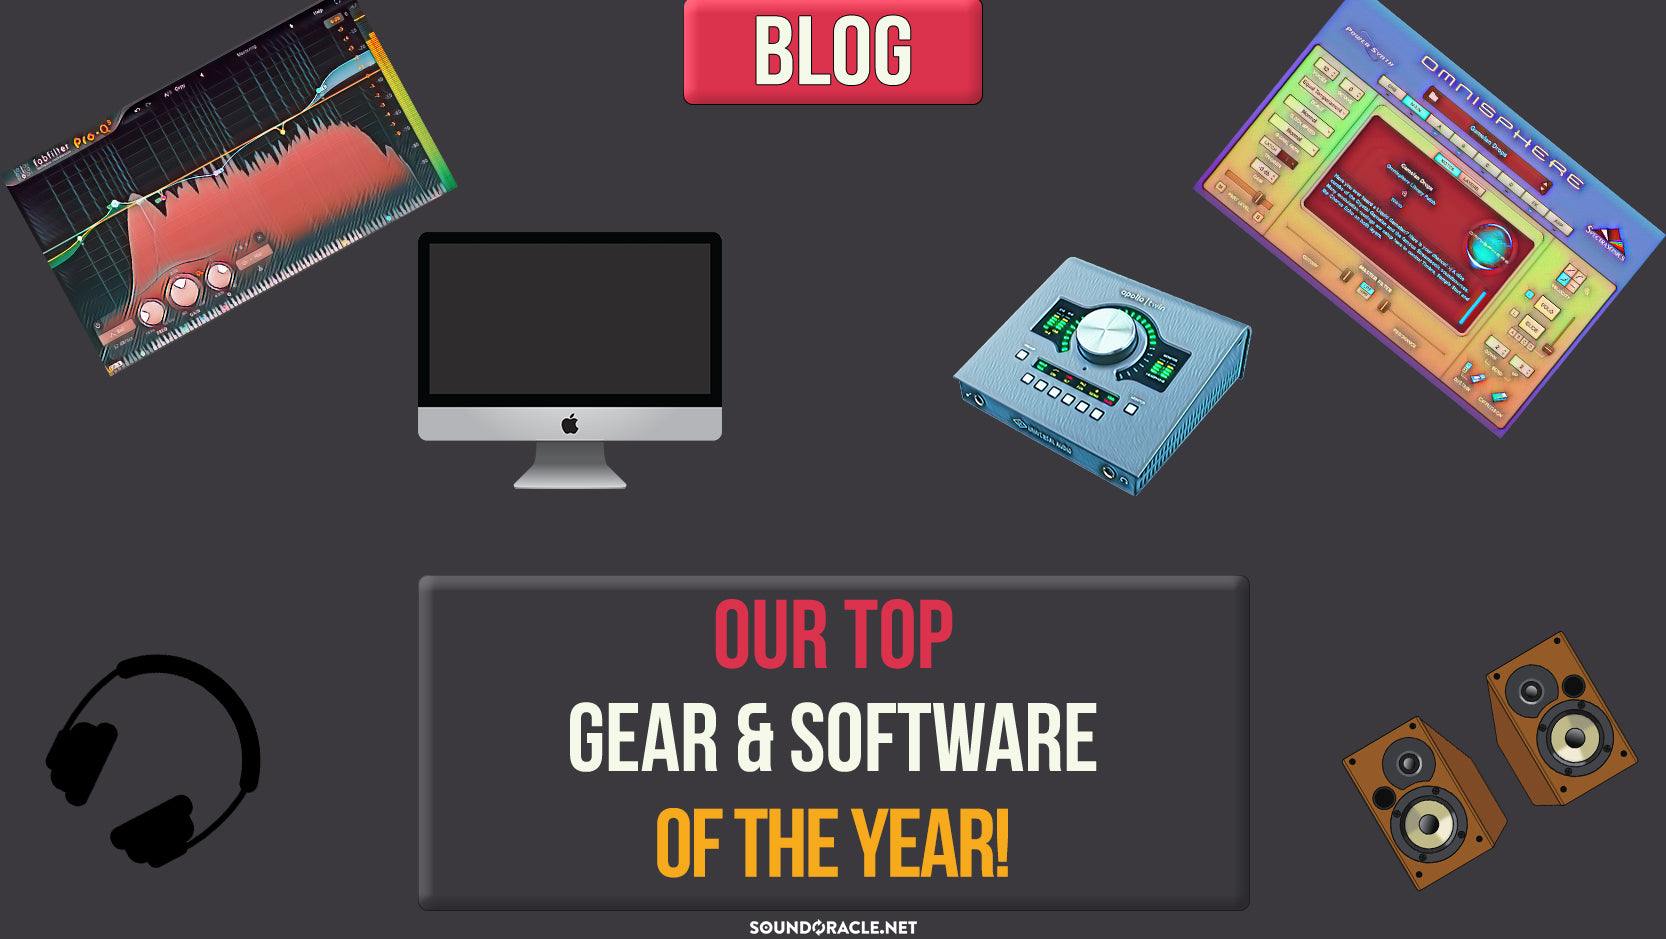 Our Top Gear & Software of the Year!